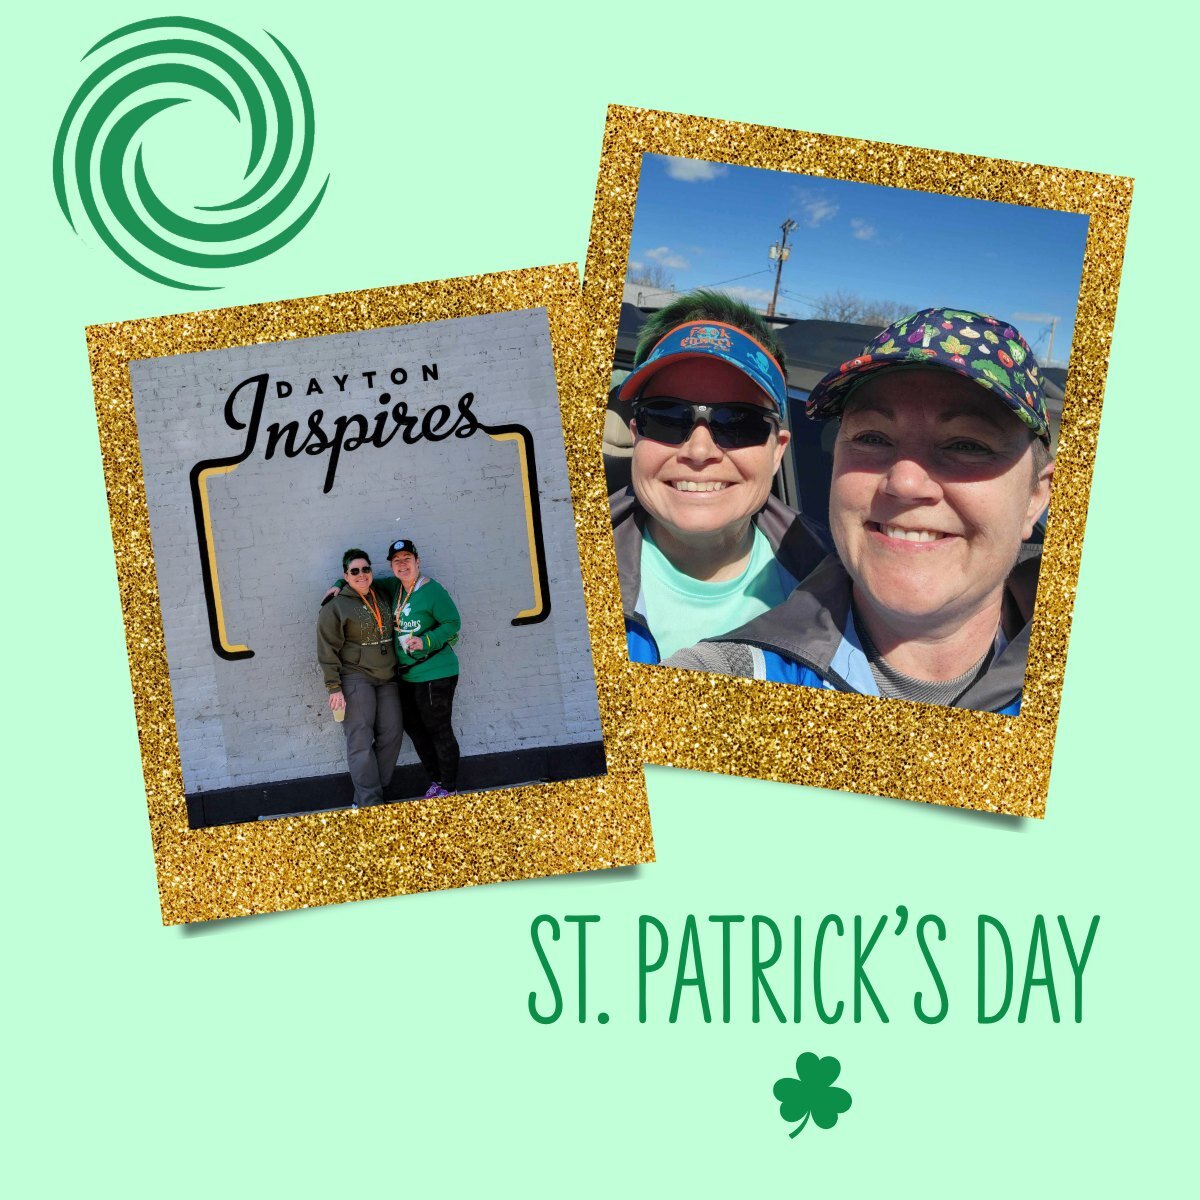 ☘️ Our St. Patrick's weekend was filled with fun and fitness! 🌟 Lori and Brenda kicked things off with The Longest Mile at The Dublin Pub by Key Sports on Saturday &ndash; talk about an epic race experience! 🏃&zwj;♀️ Then, on Sunday, we hit the bik